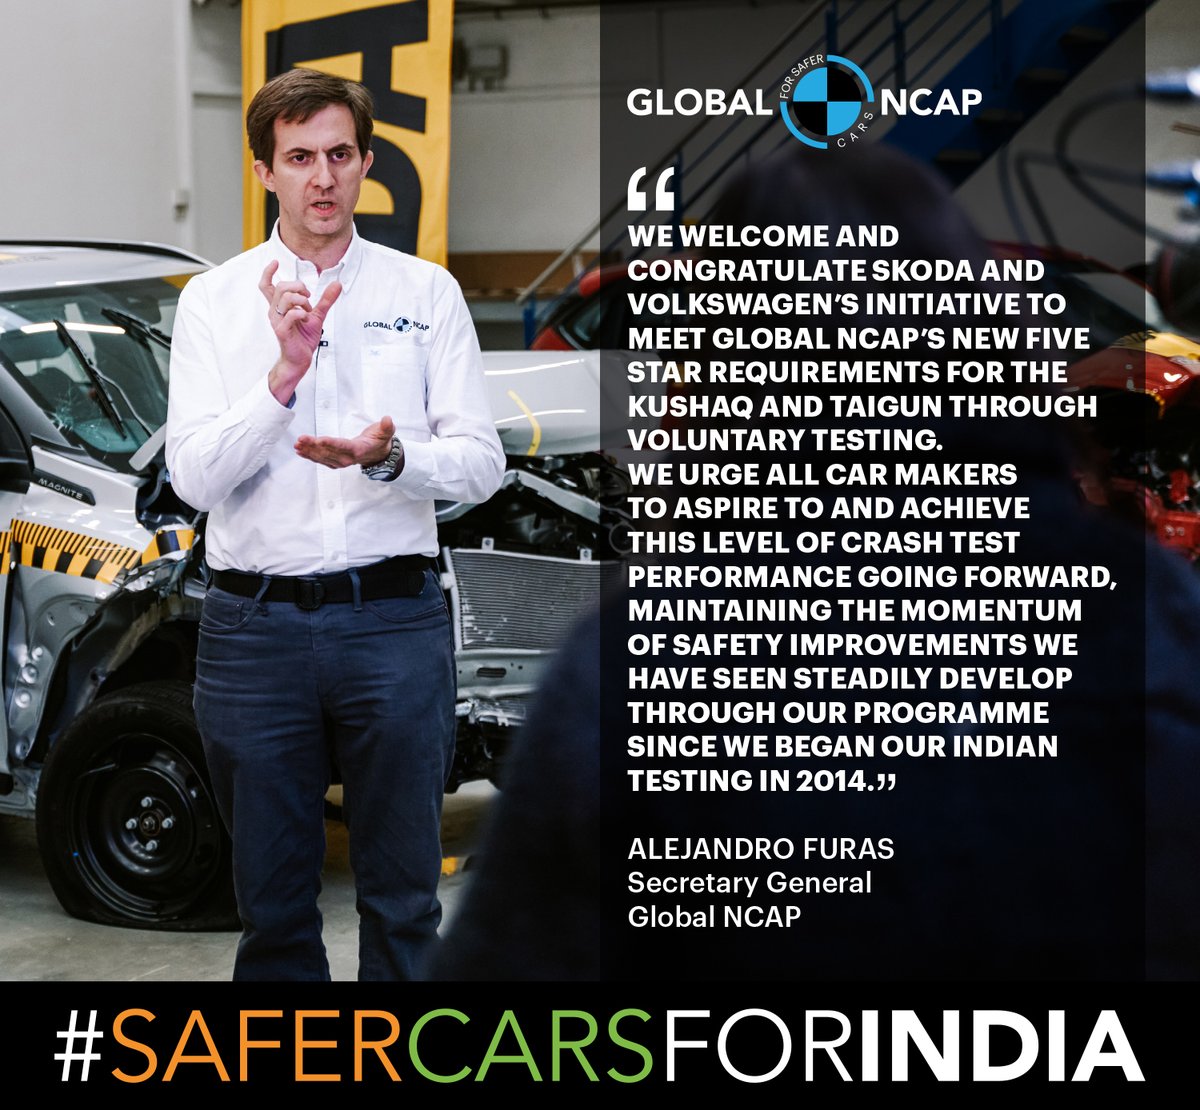 'We welcome @SkodaIndia & @volkswagenindia’s initiative to meet @GlobalNCAP’s new 5 star requirements. We urge all car makers to achieve this level of crash test performance, maintaining the momentum of safety improvements we’ve seen through our programme since we began in 2014.'